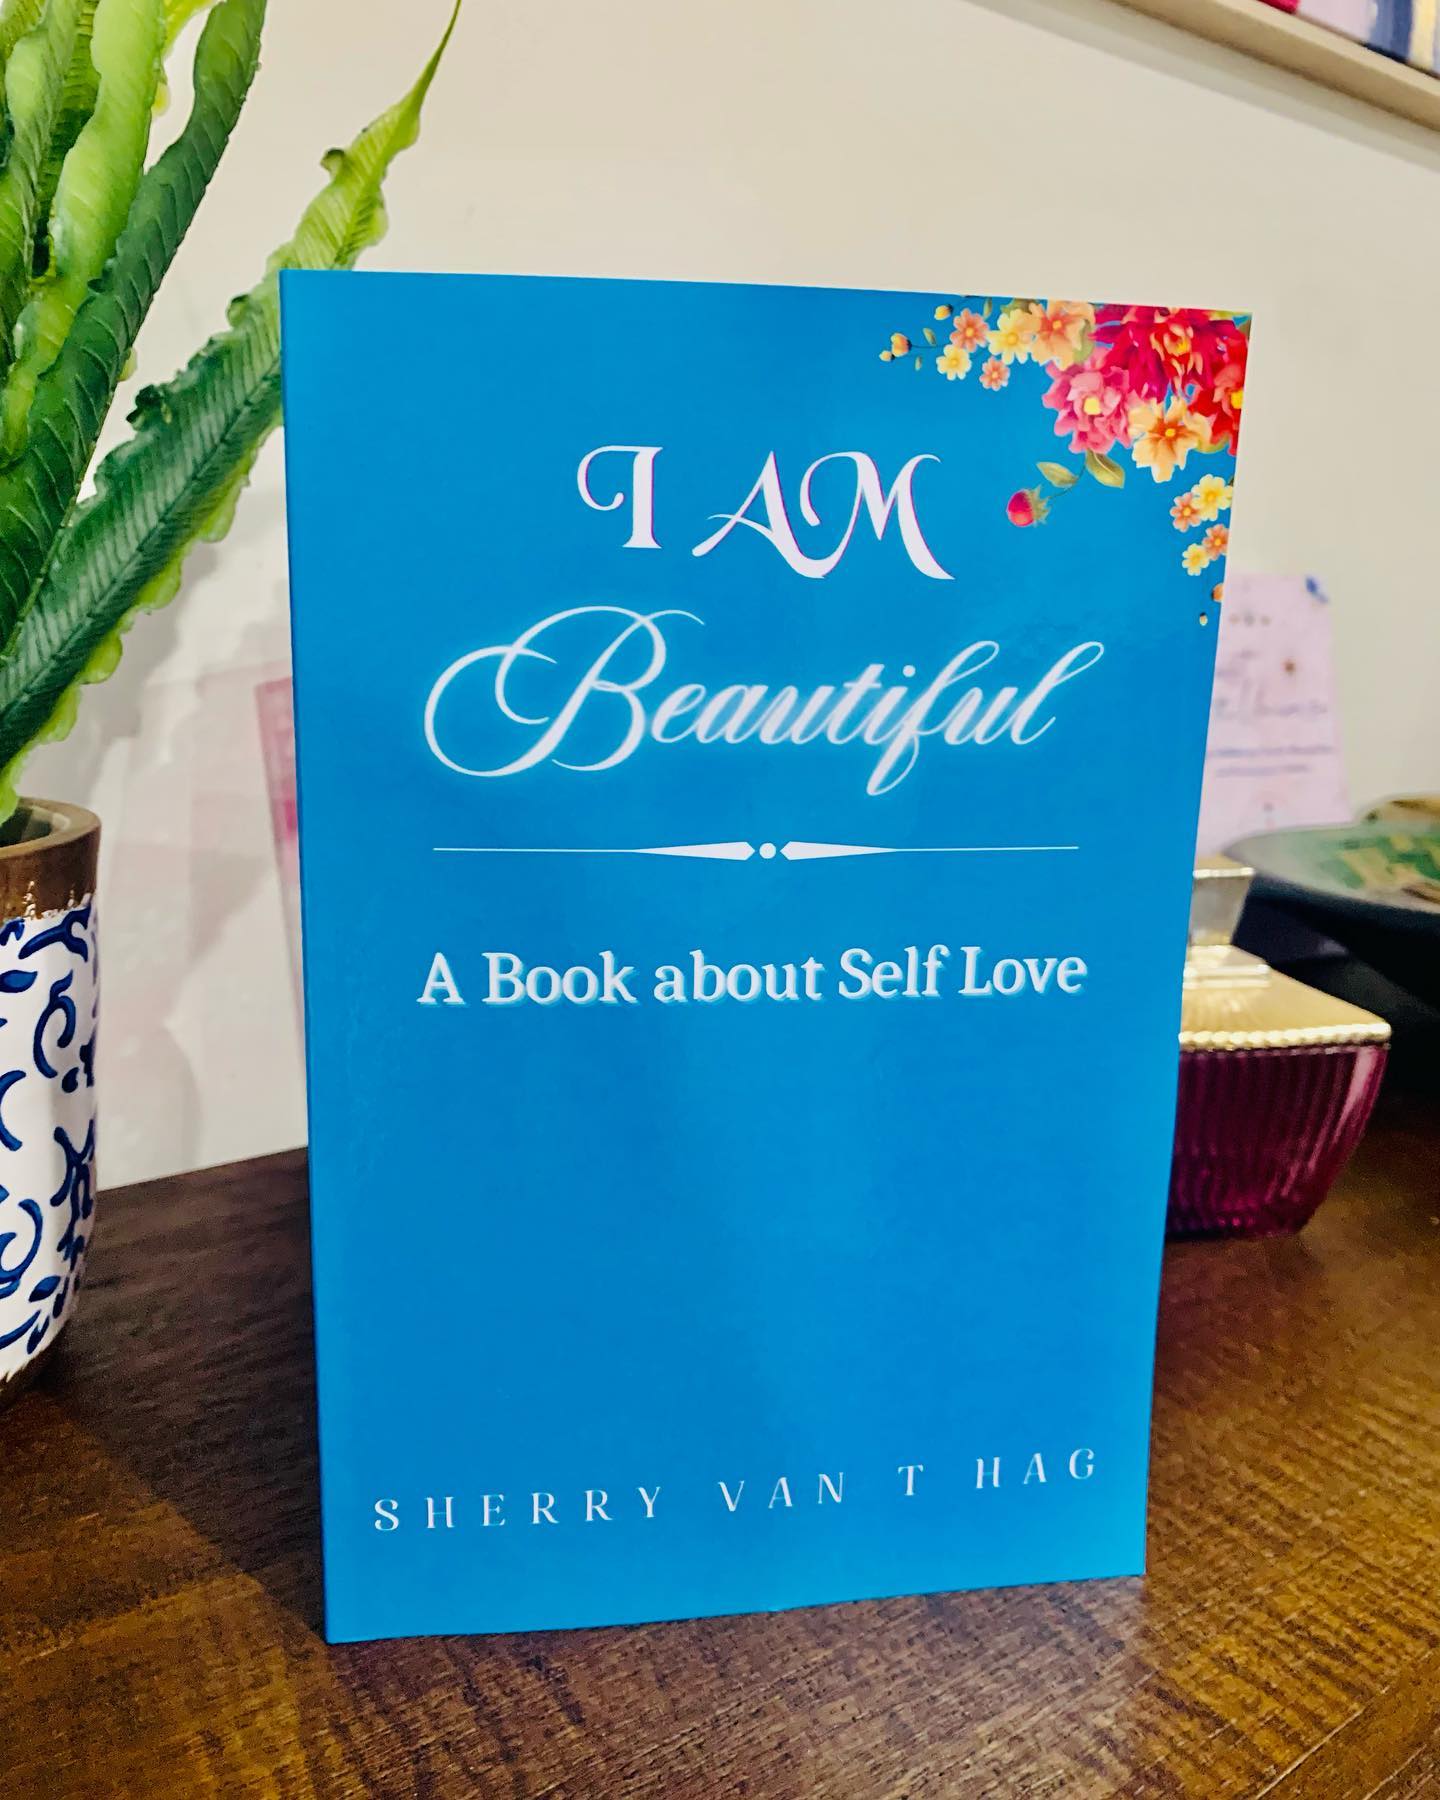 Sherry's new Affirmation Book 'I AM Beautiful'